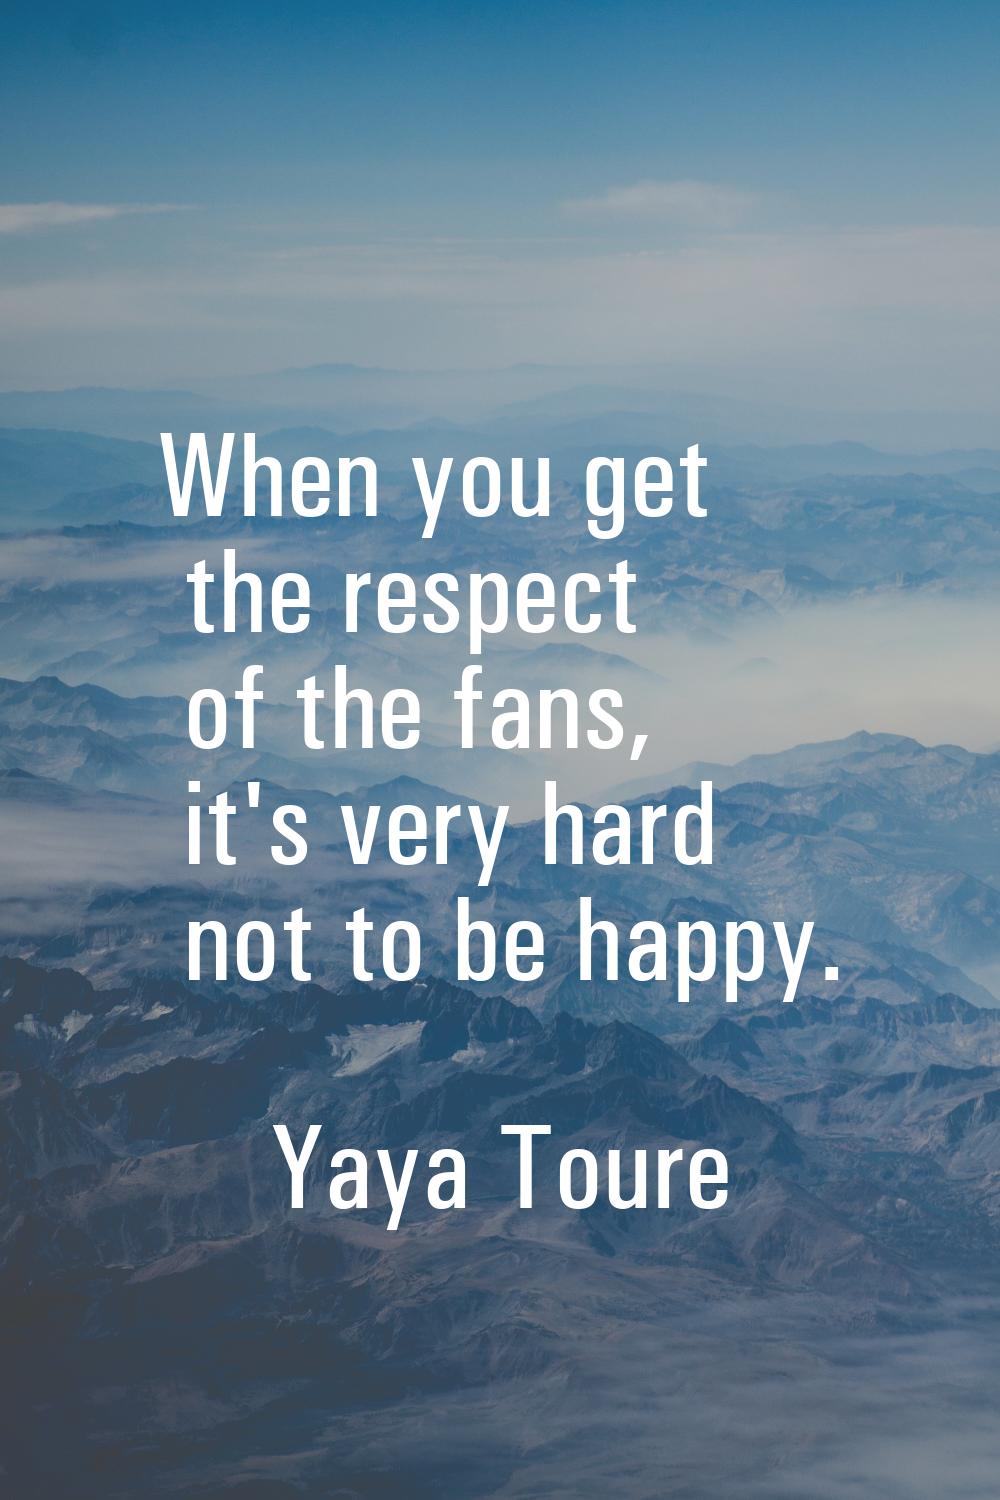 When you get the respect of the fans, it's very hard not to be happy.